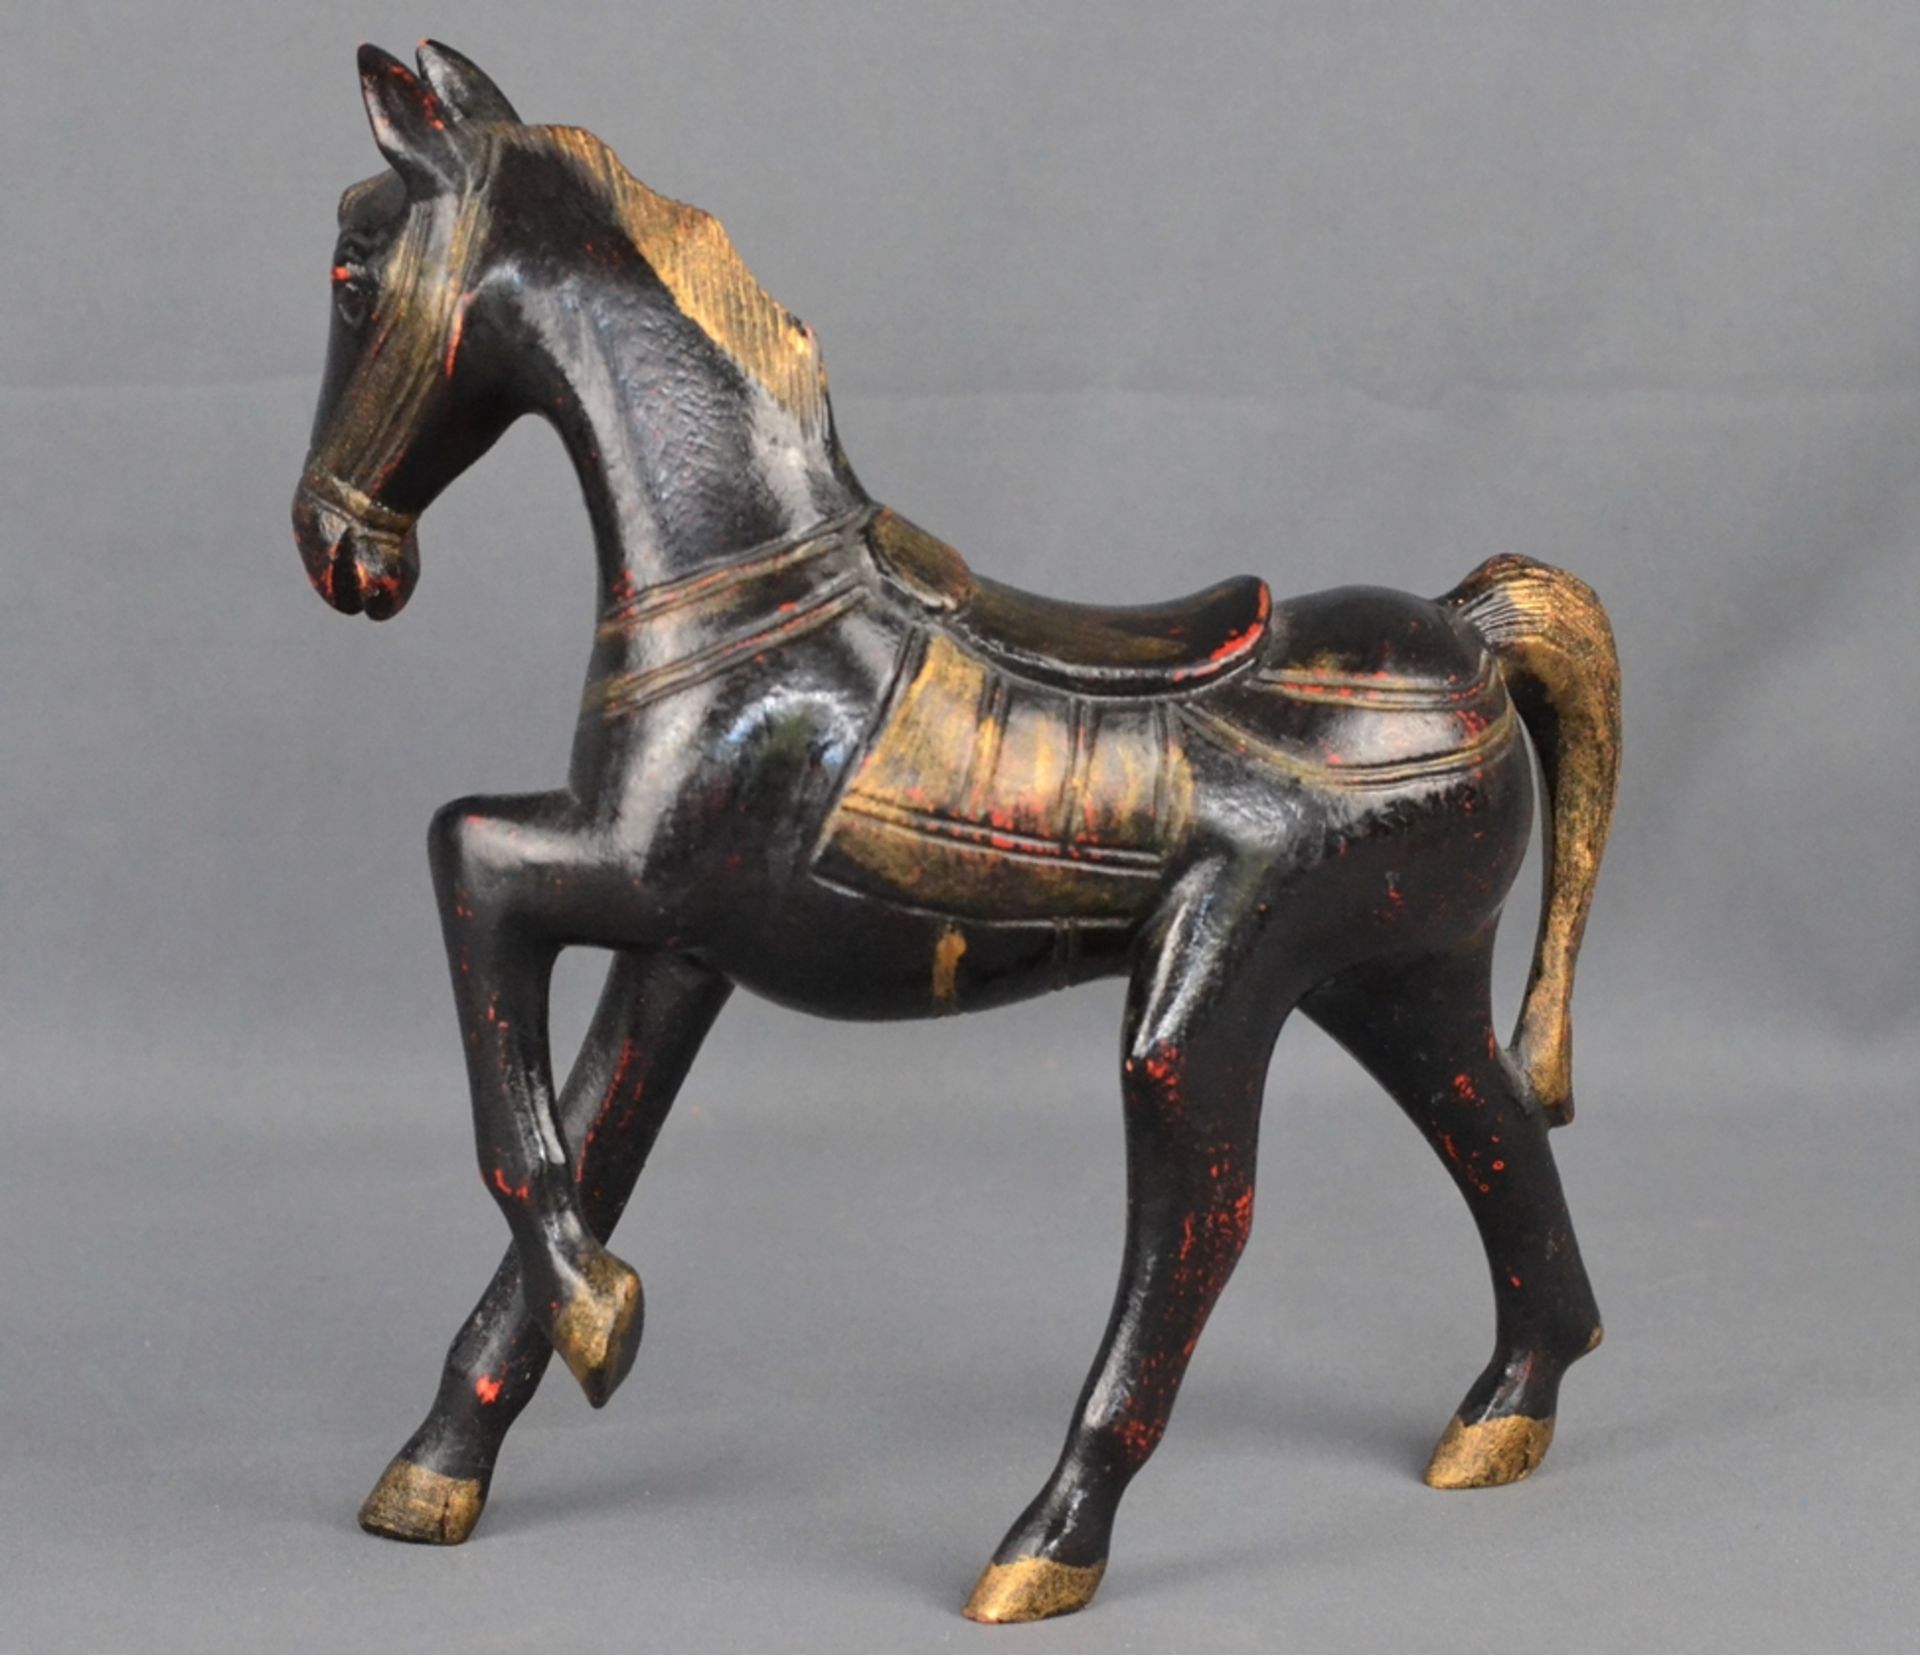 Decorative wooden horse, wood painted black, partially gilded, 20th century, 26x23x6cm - Image 2 of 2